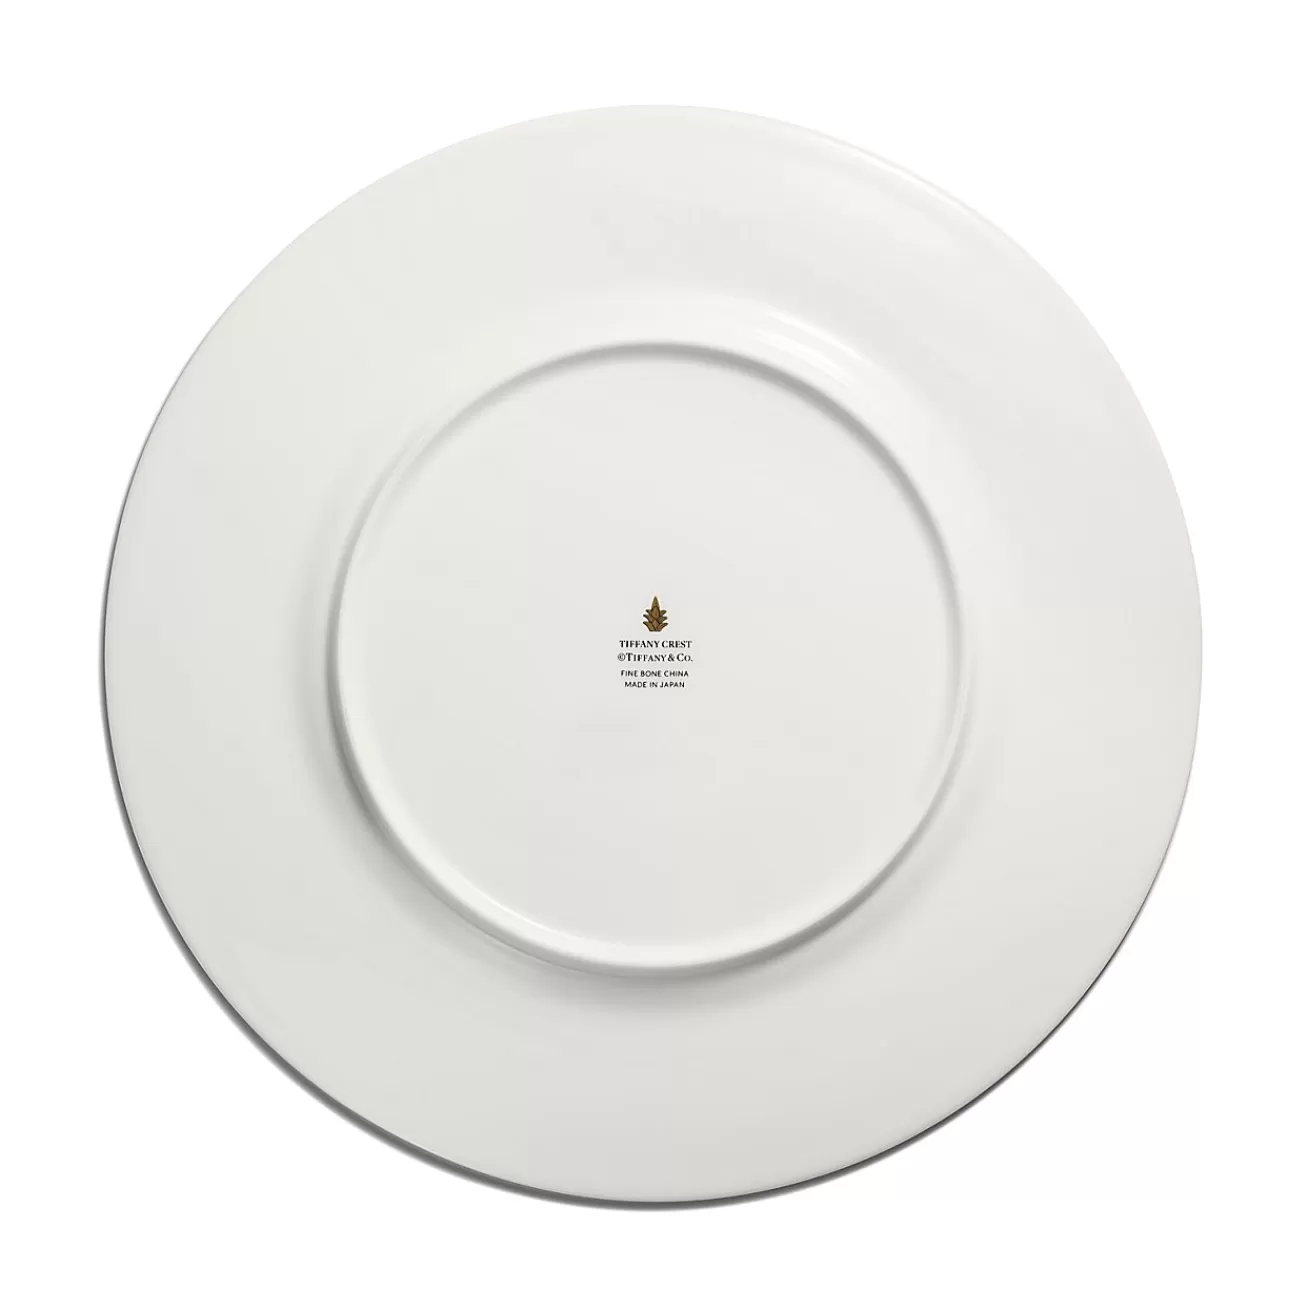 Tiffany & Co. Tiffany Crest Charger in Bone China | ^ The Home | Housewarming Gifts